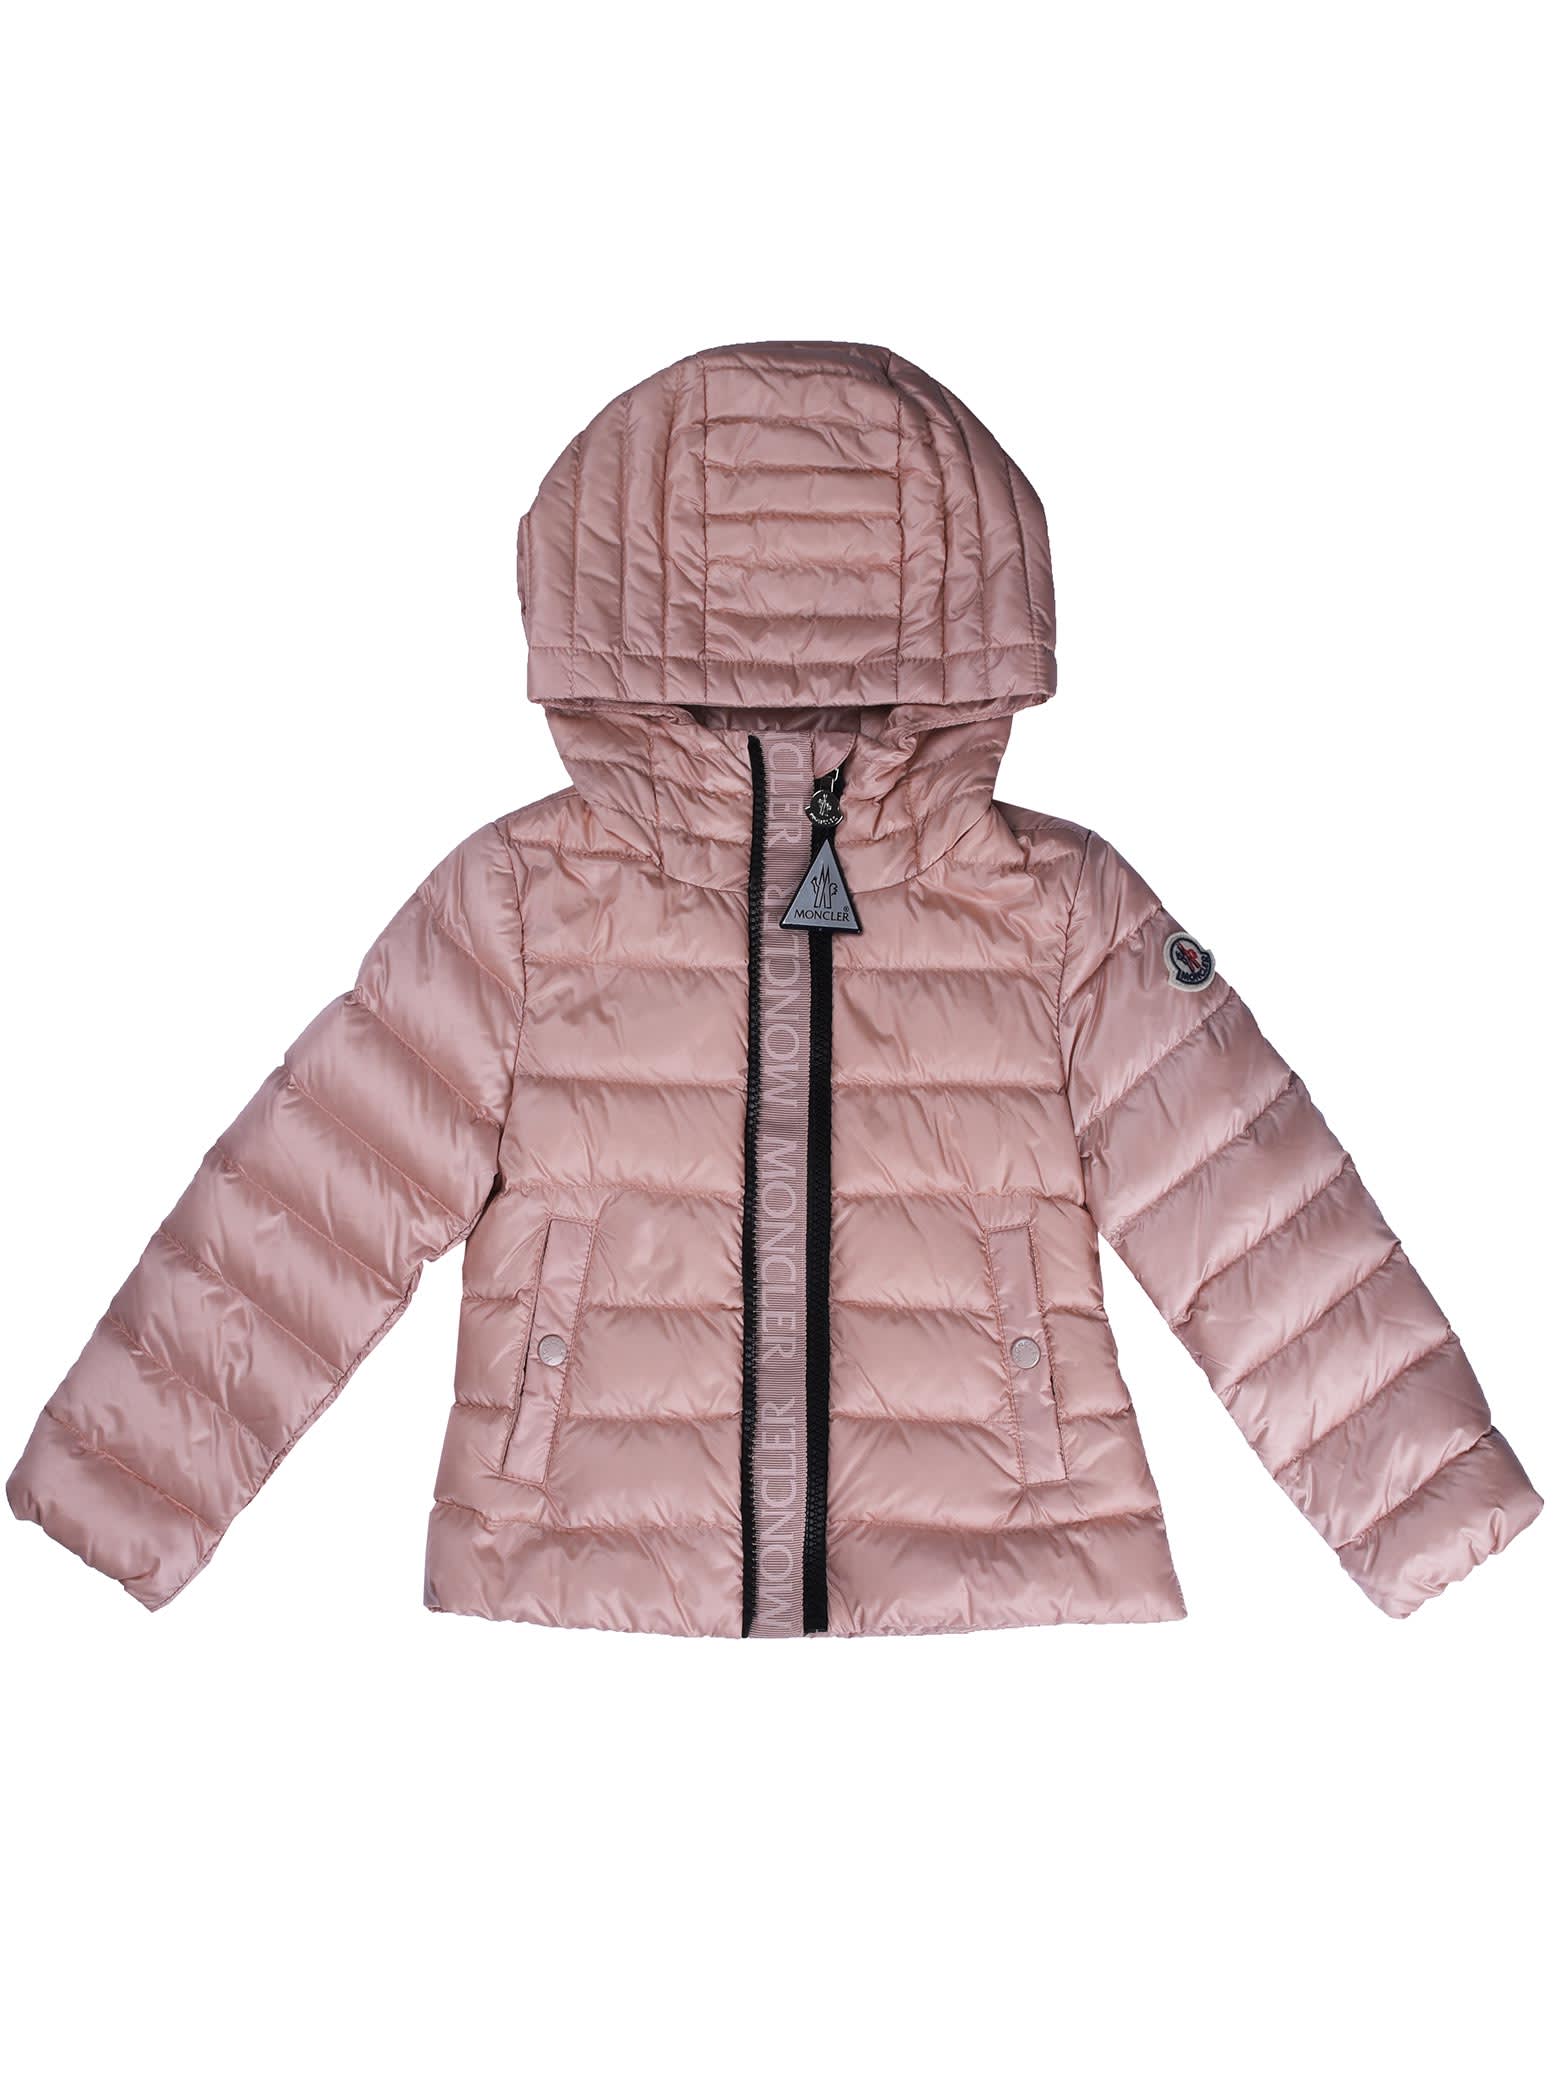 Moncler Pink Glycine Down Jacket With Hood